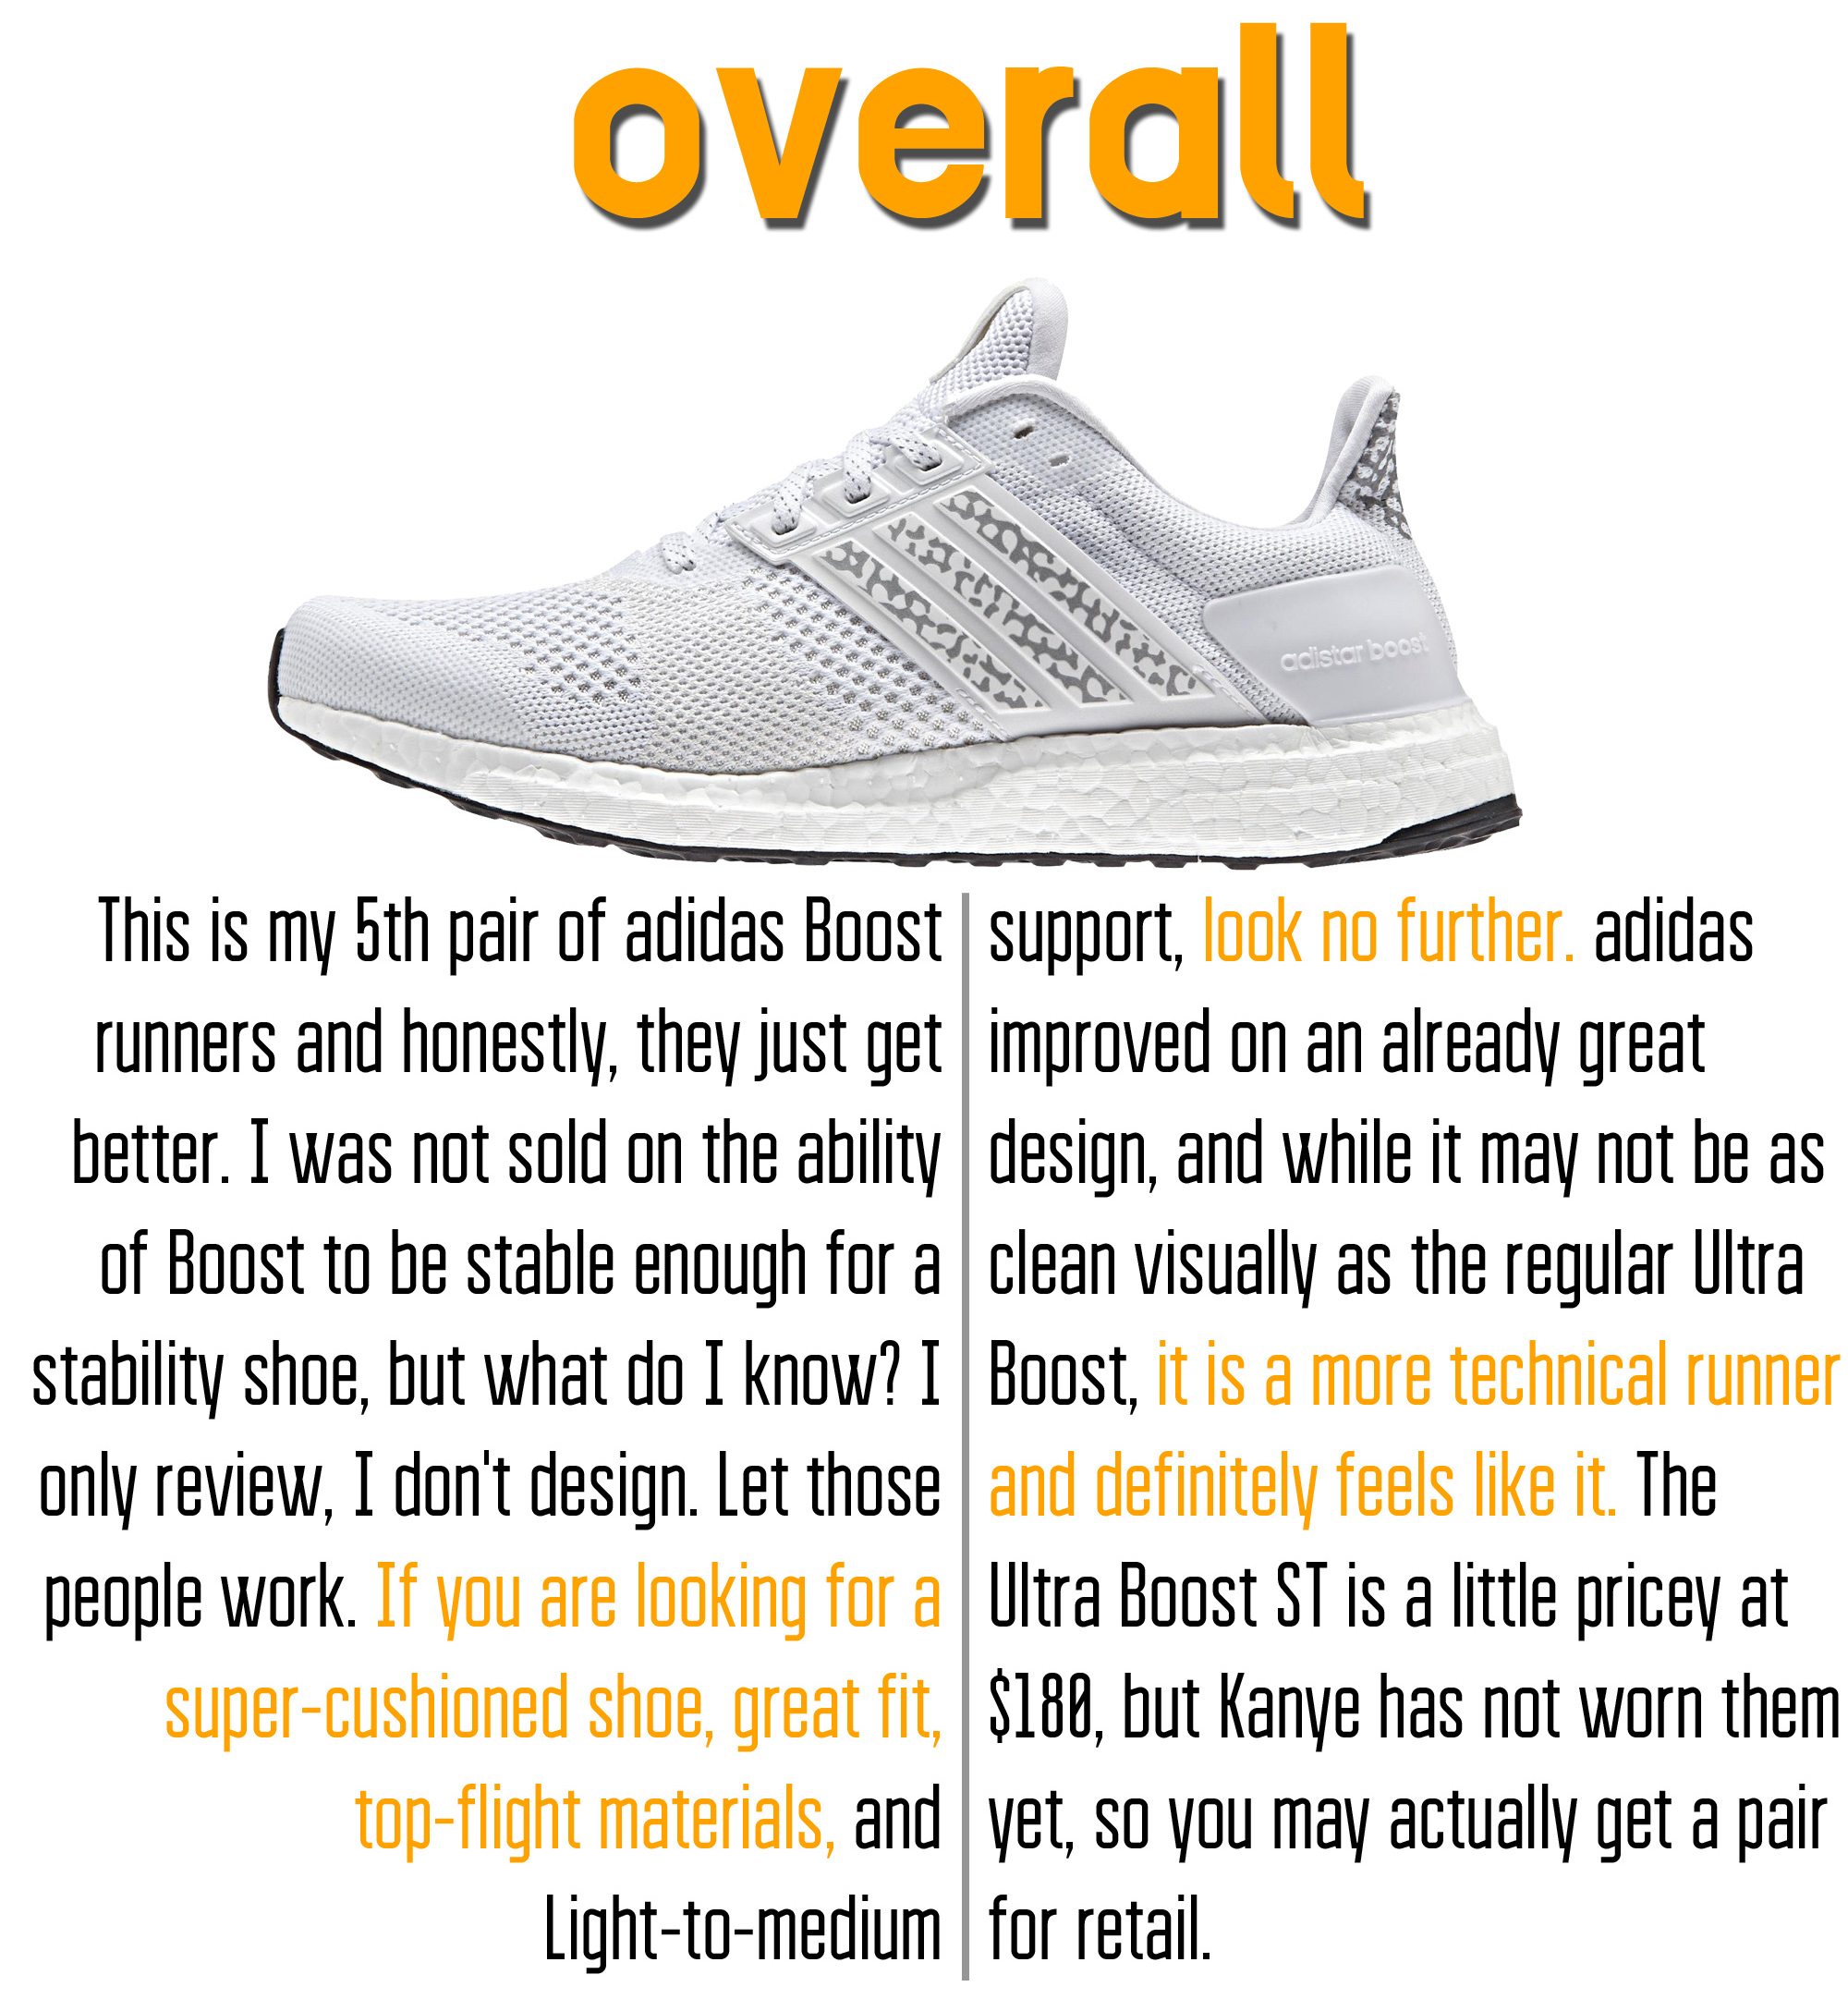 ST BOOST overall